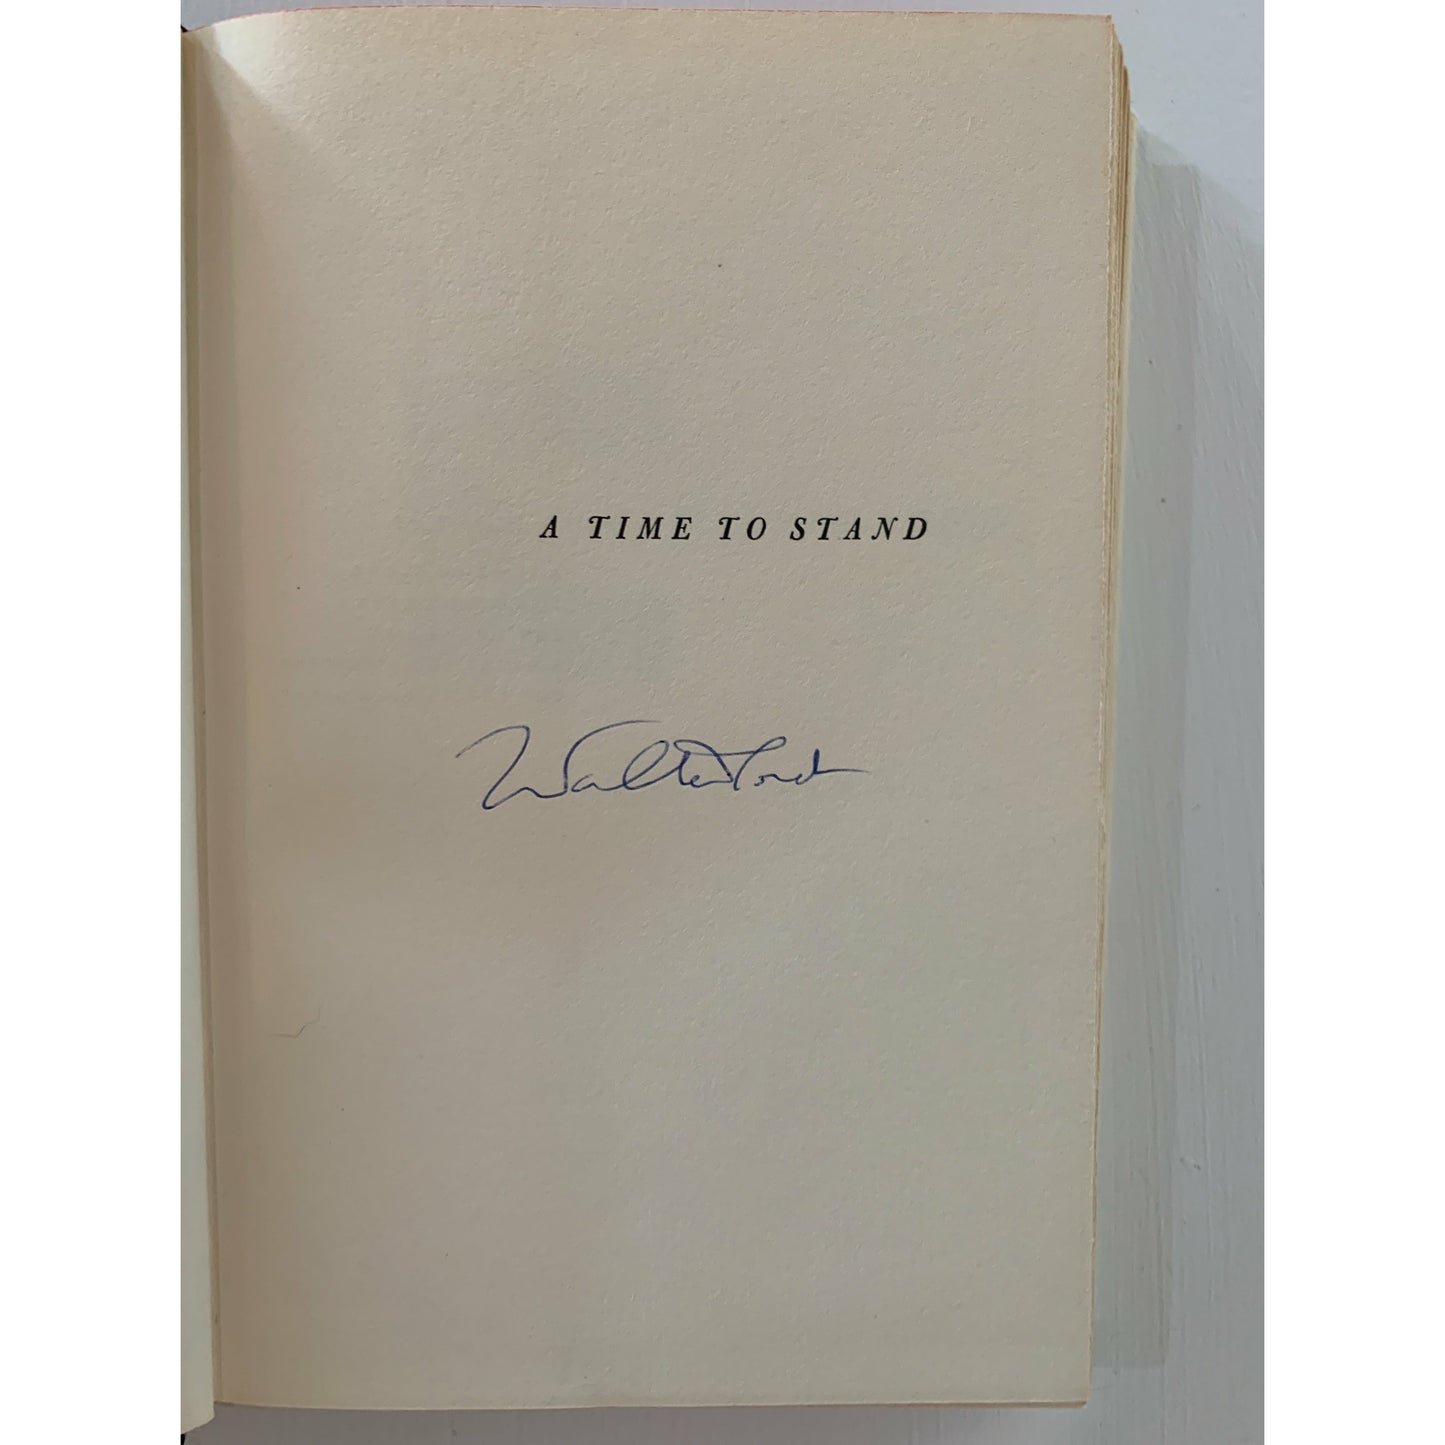 A Time To Stand, Walter Lord, Signed First Edition, The Alamo History, 1961